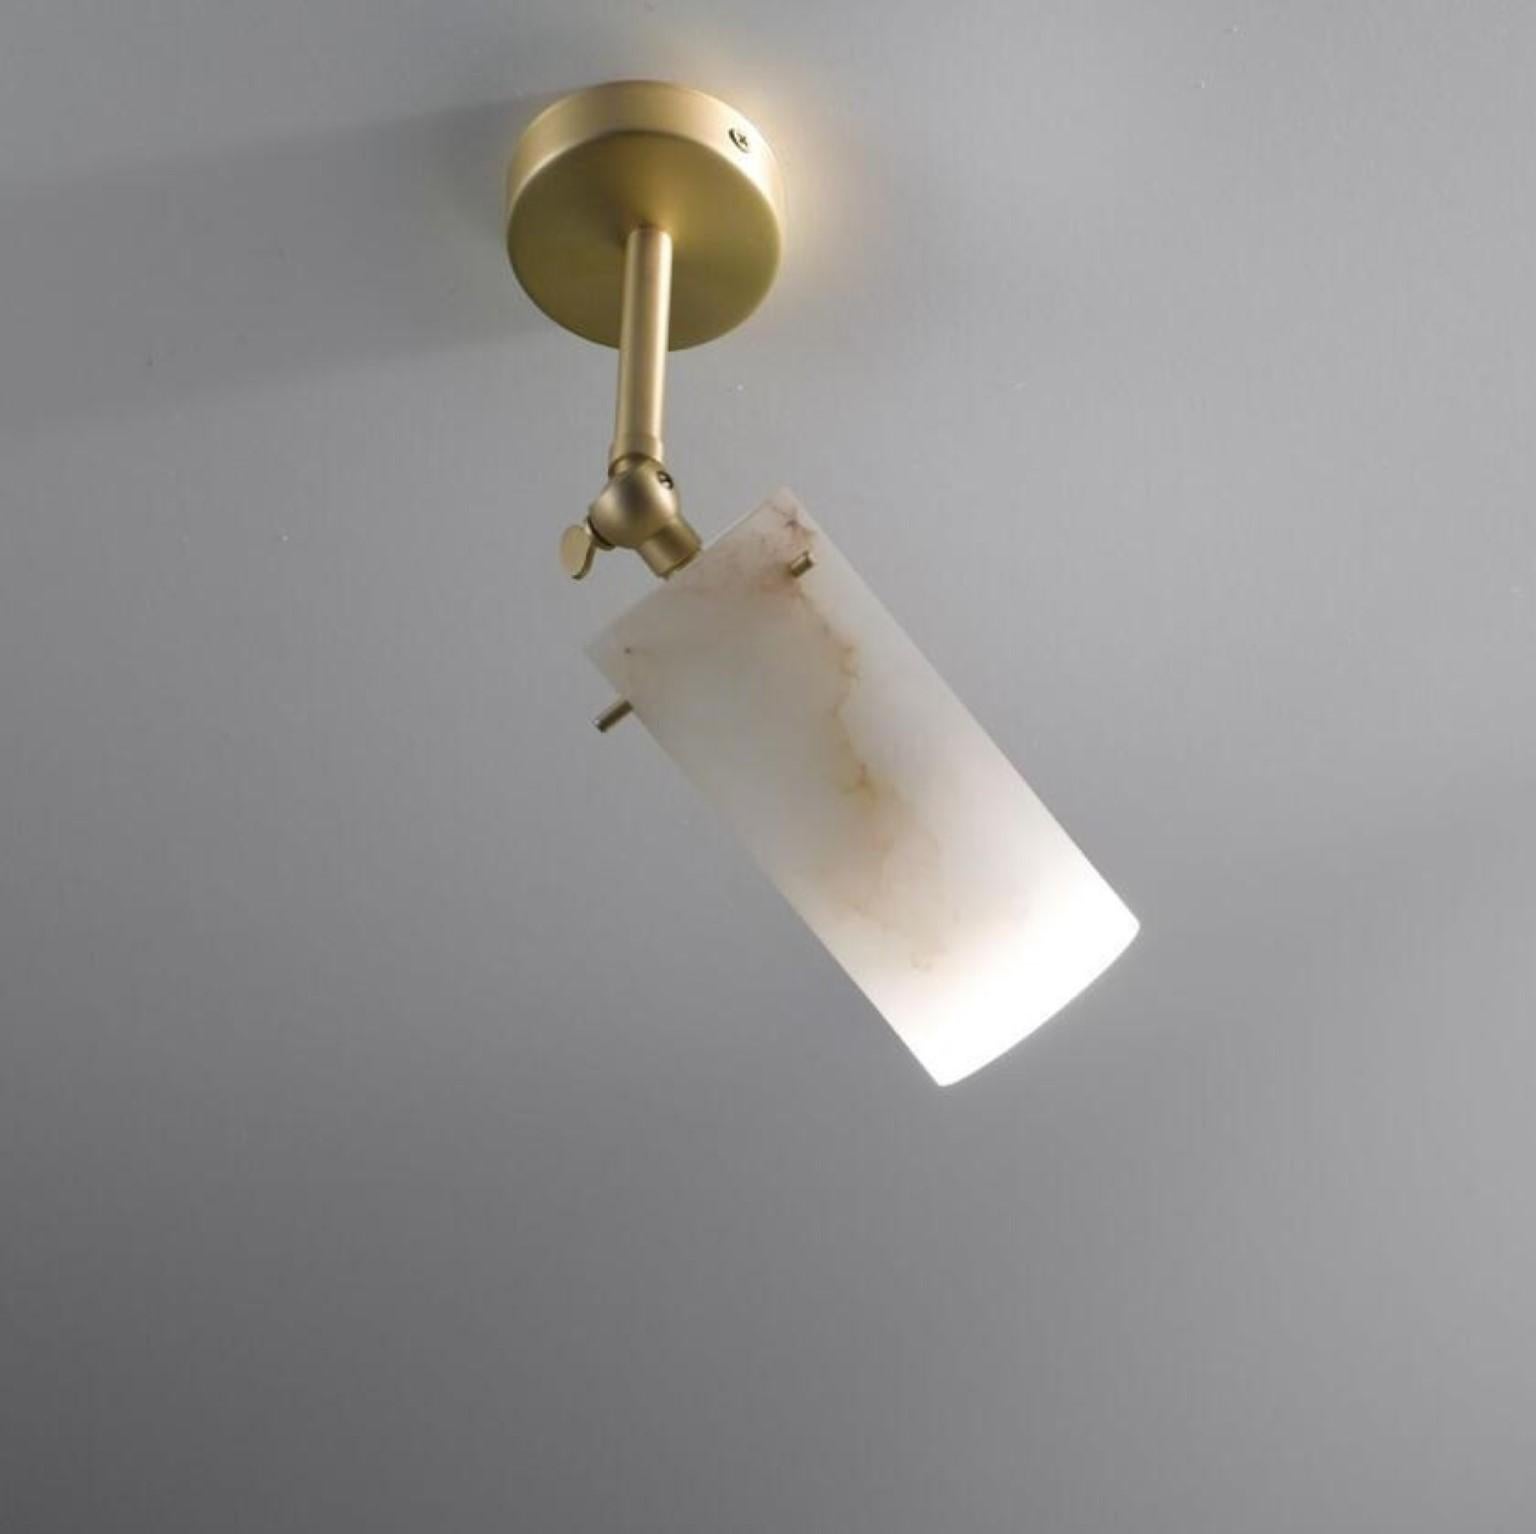 Spotlight Poseidone #1 by Alabastro Italiano
Dimensions: W 8 x D 11 x H 15 cm
Materials: Italian white Alabaster, Brushed Brass
Other finishes available.
Light Source 1 x GU10 LED 6 Watt, Tot. 519 Lumen, 3000 k, 220 V

All our lamps can be wired